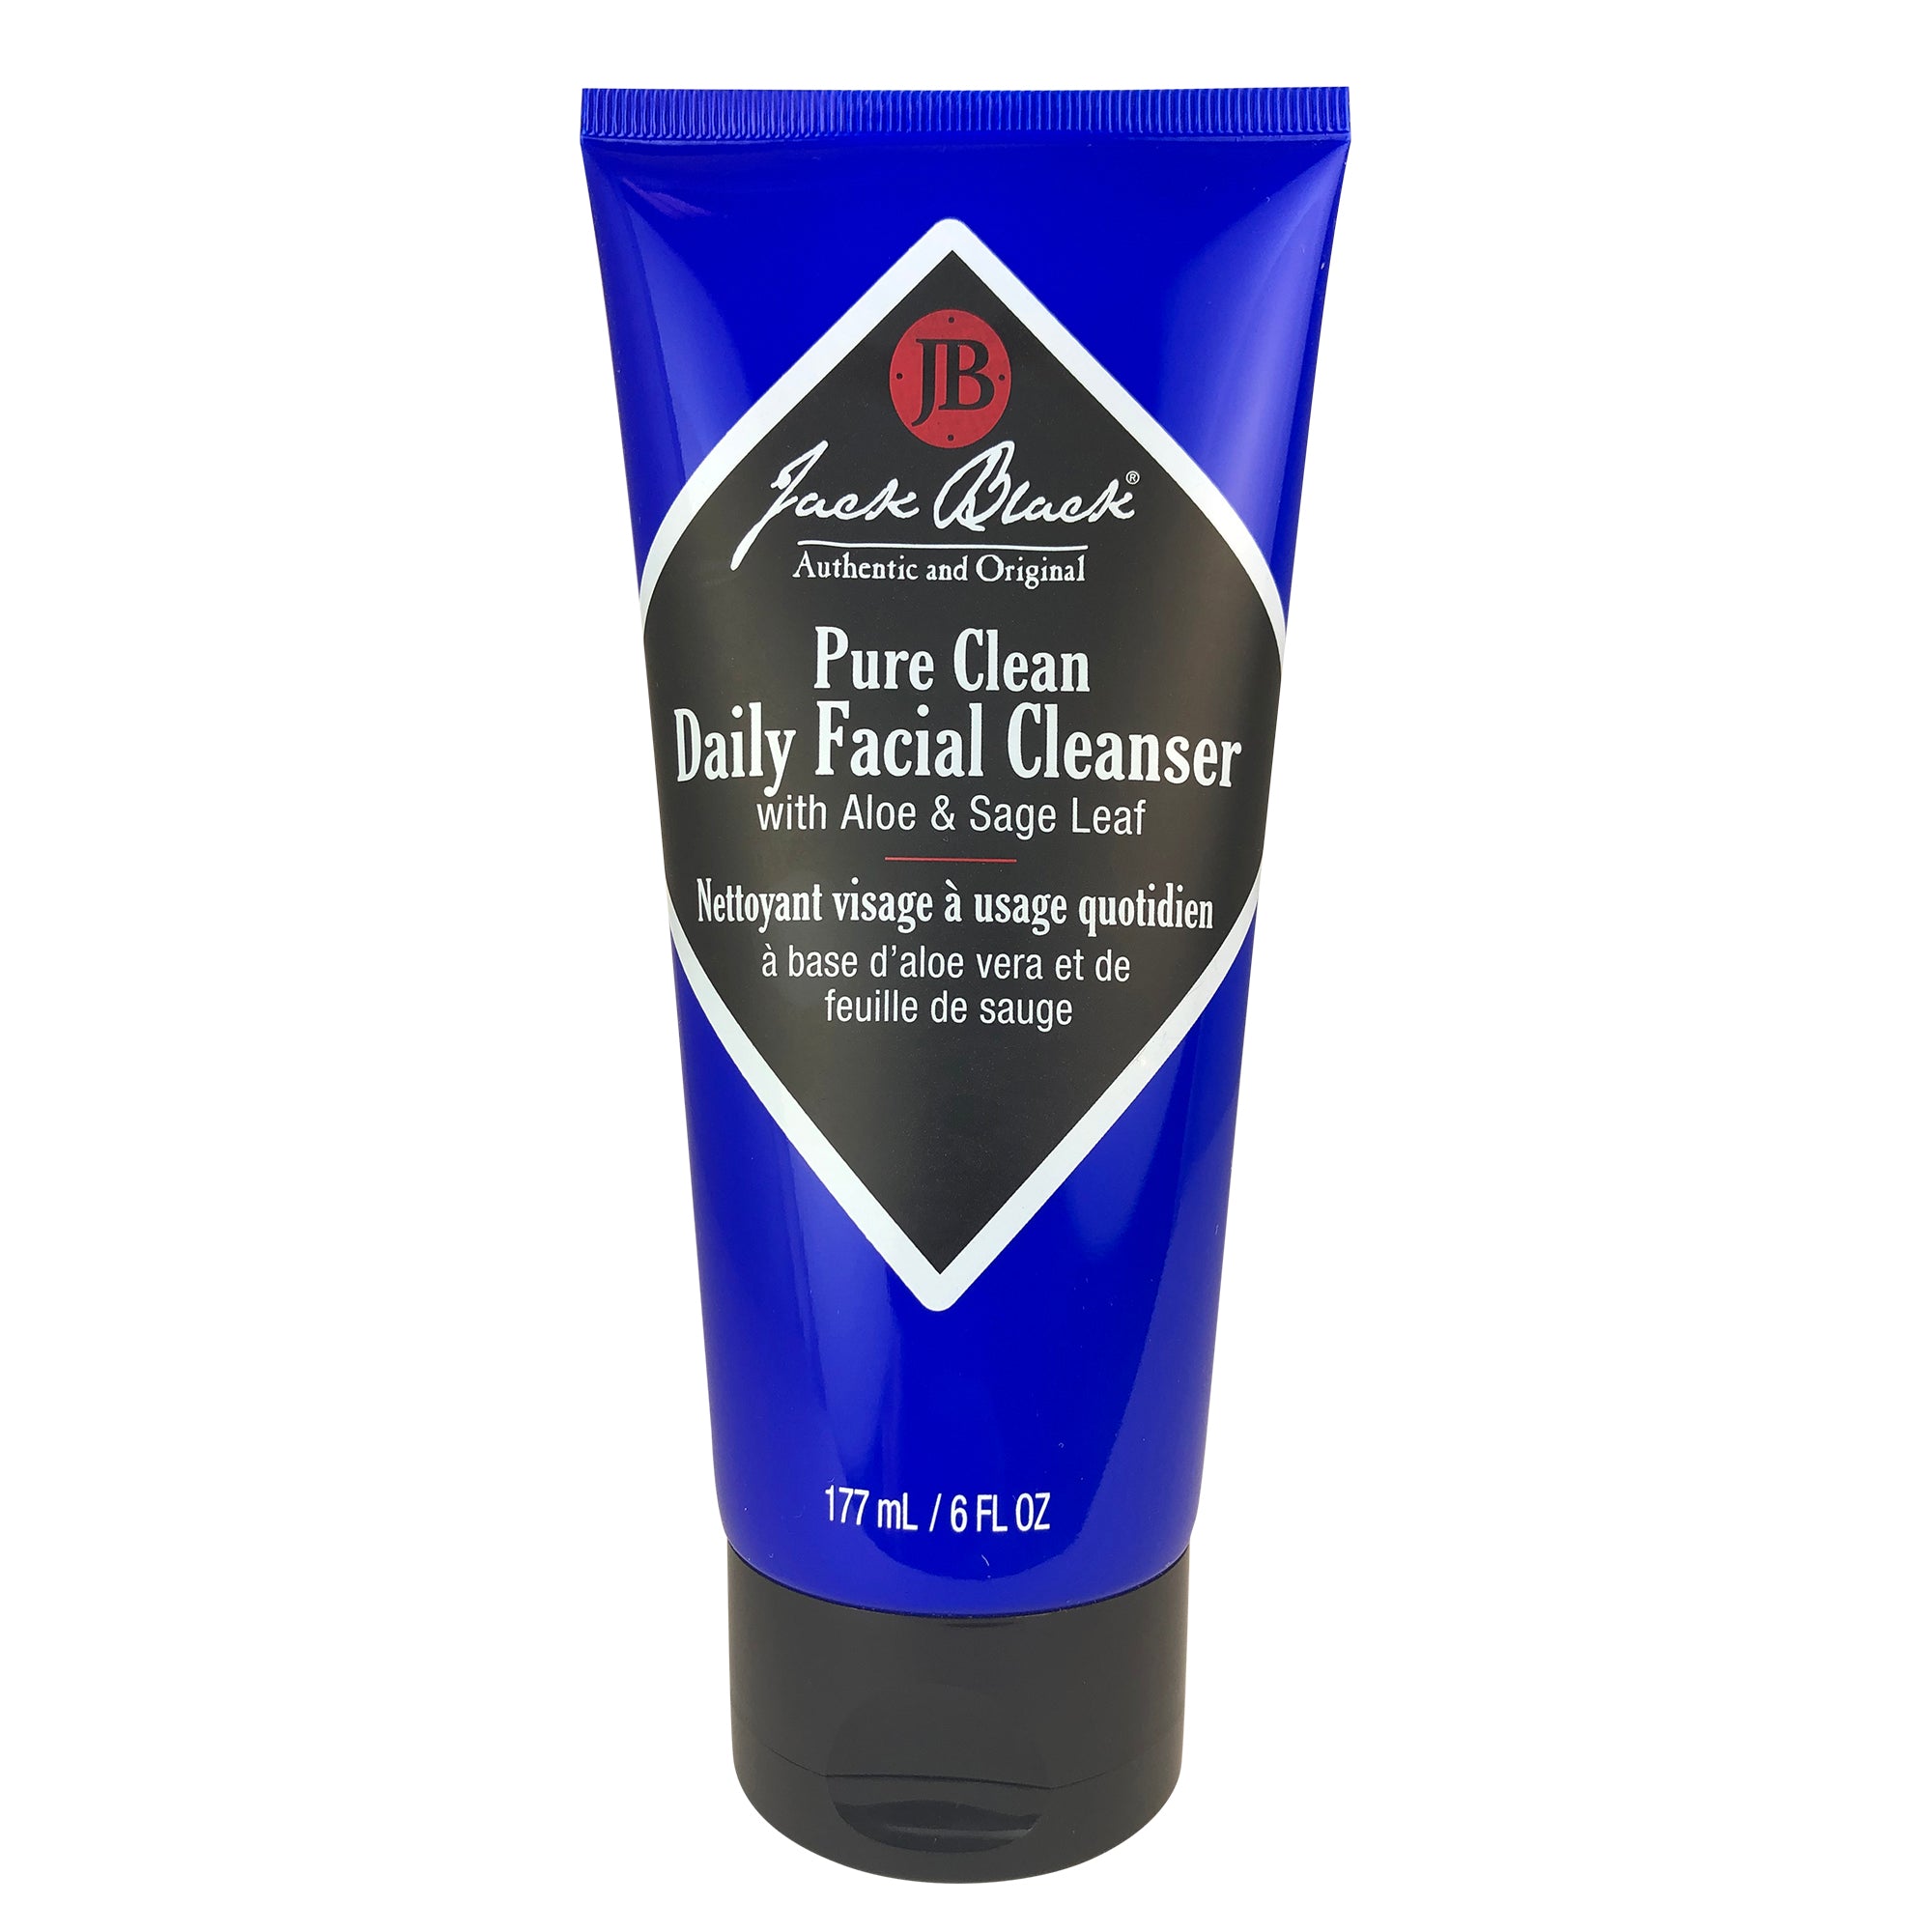 Jack Black Pure Clean Daily Facial Cleanser 6 oz.